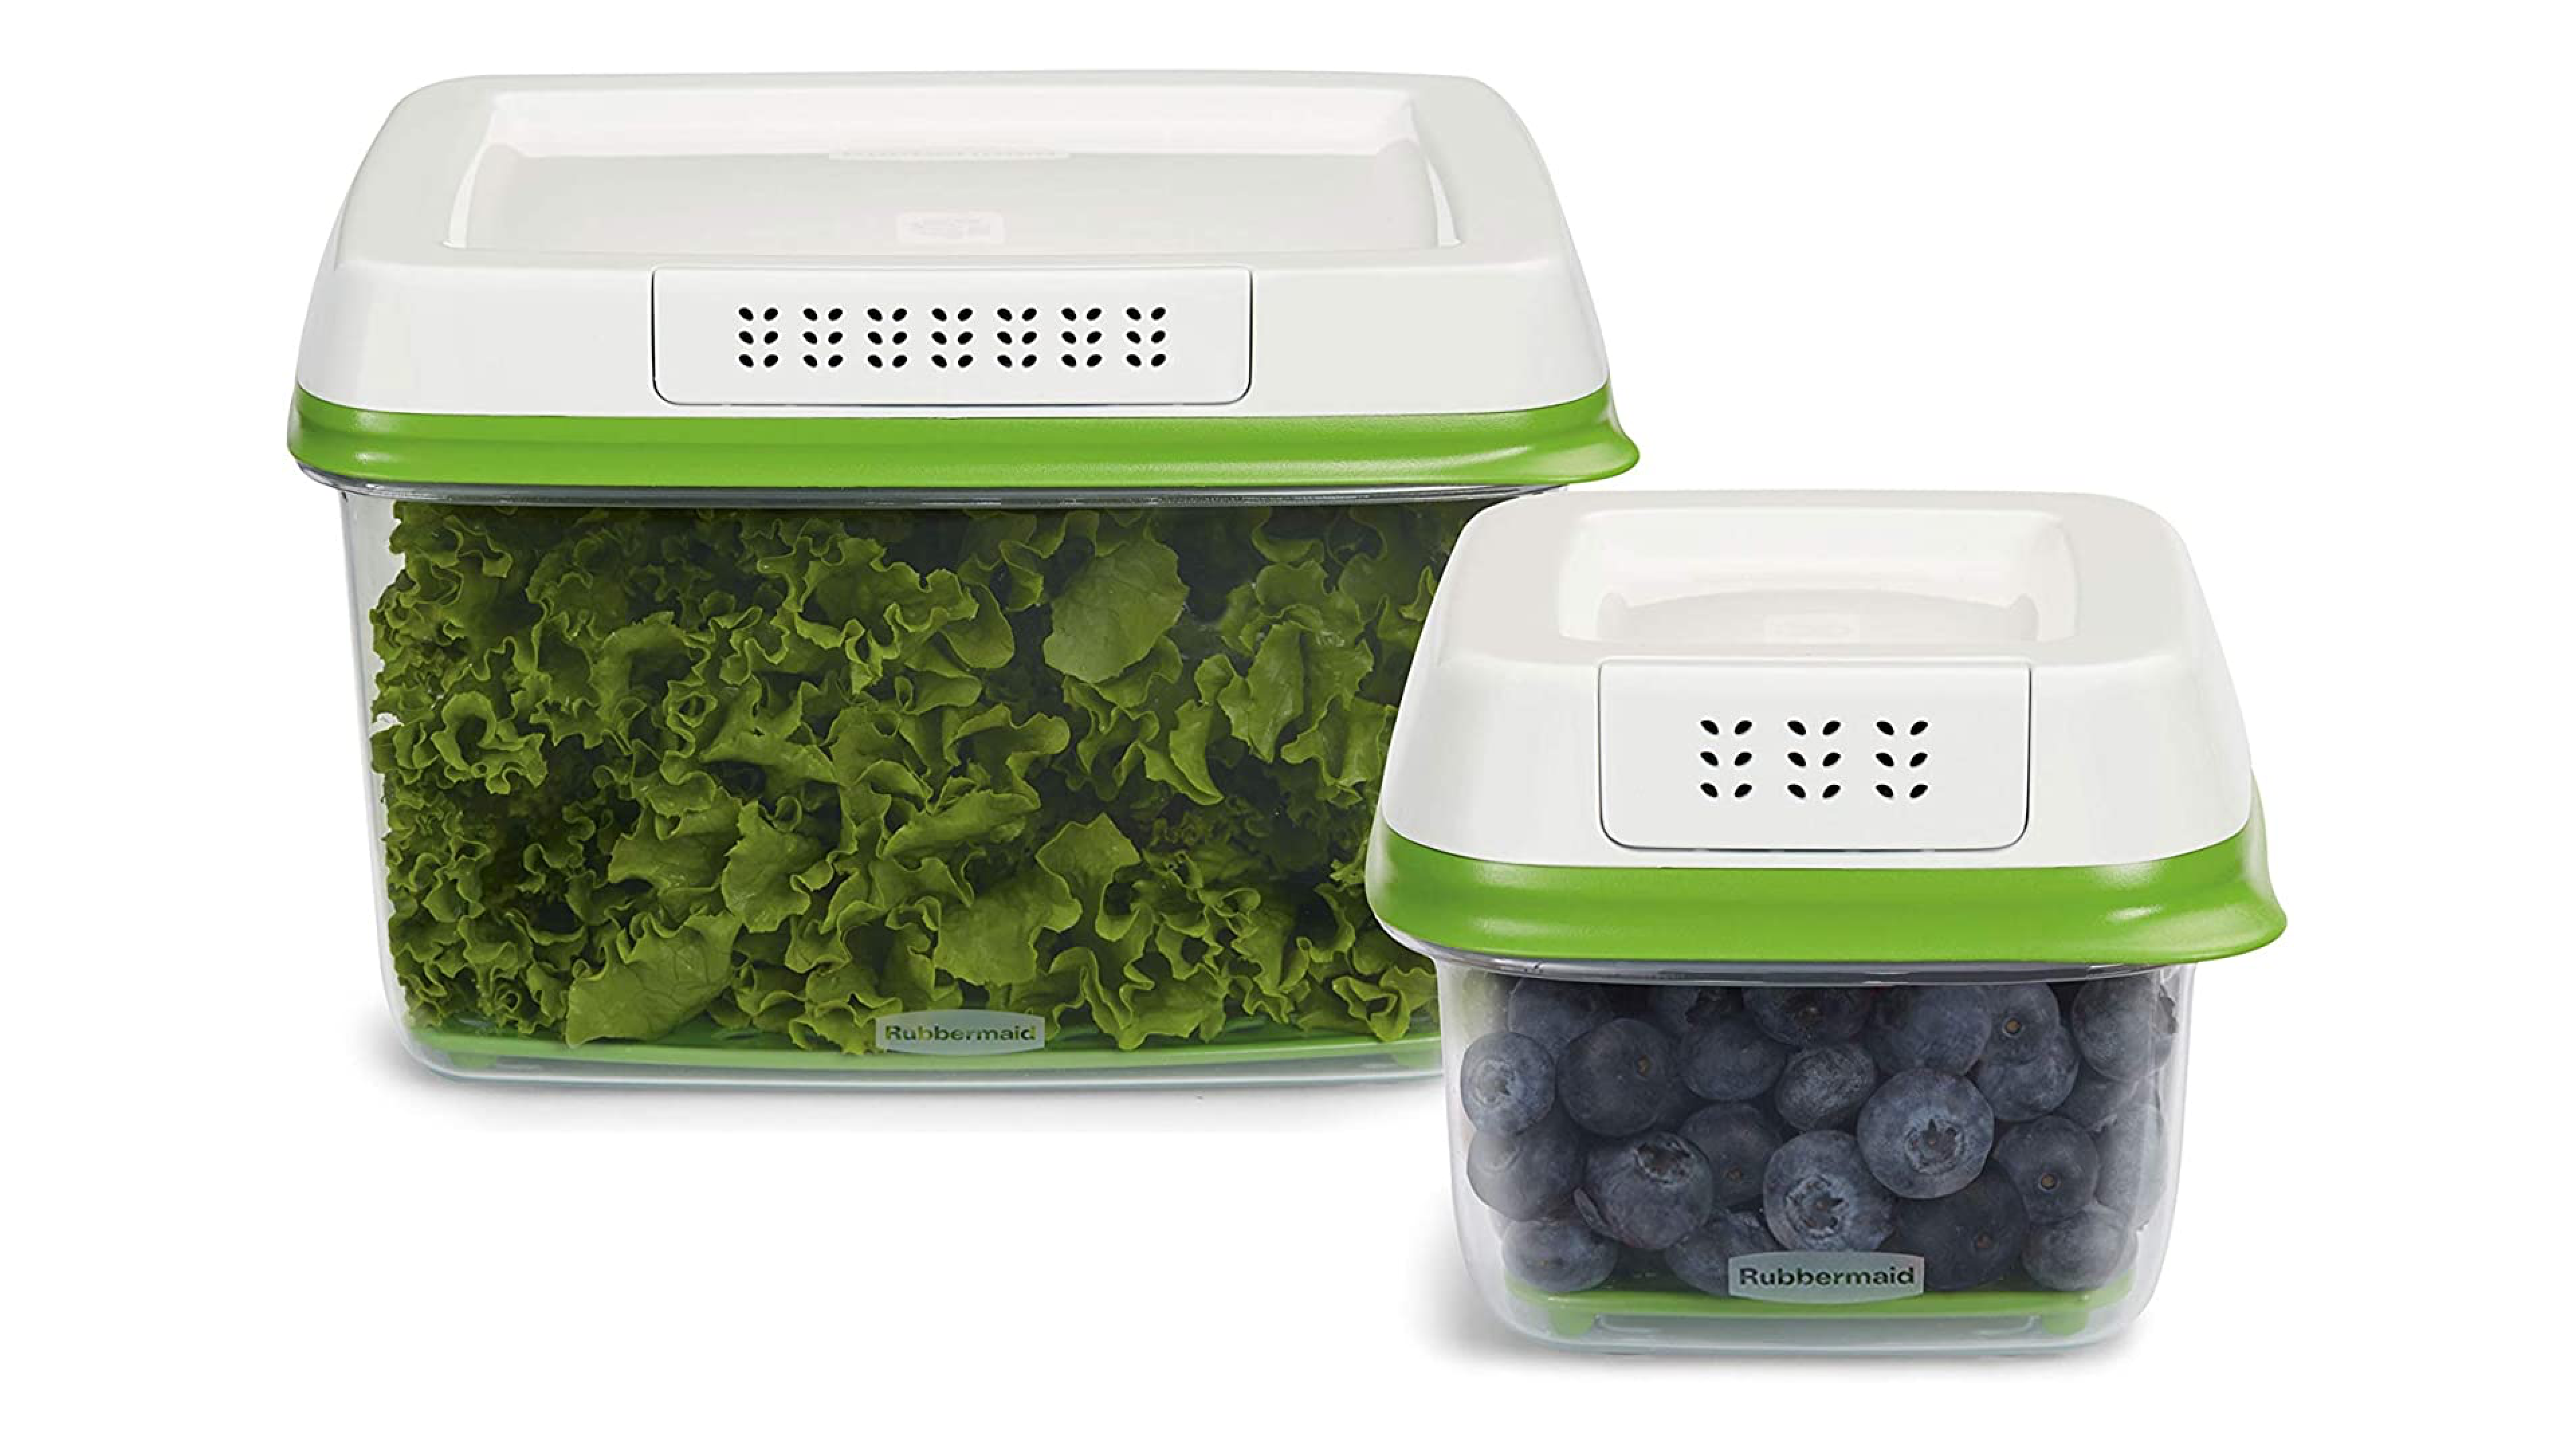 food containers that can regulate airflow and keep produce fresh